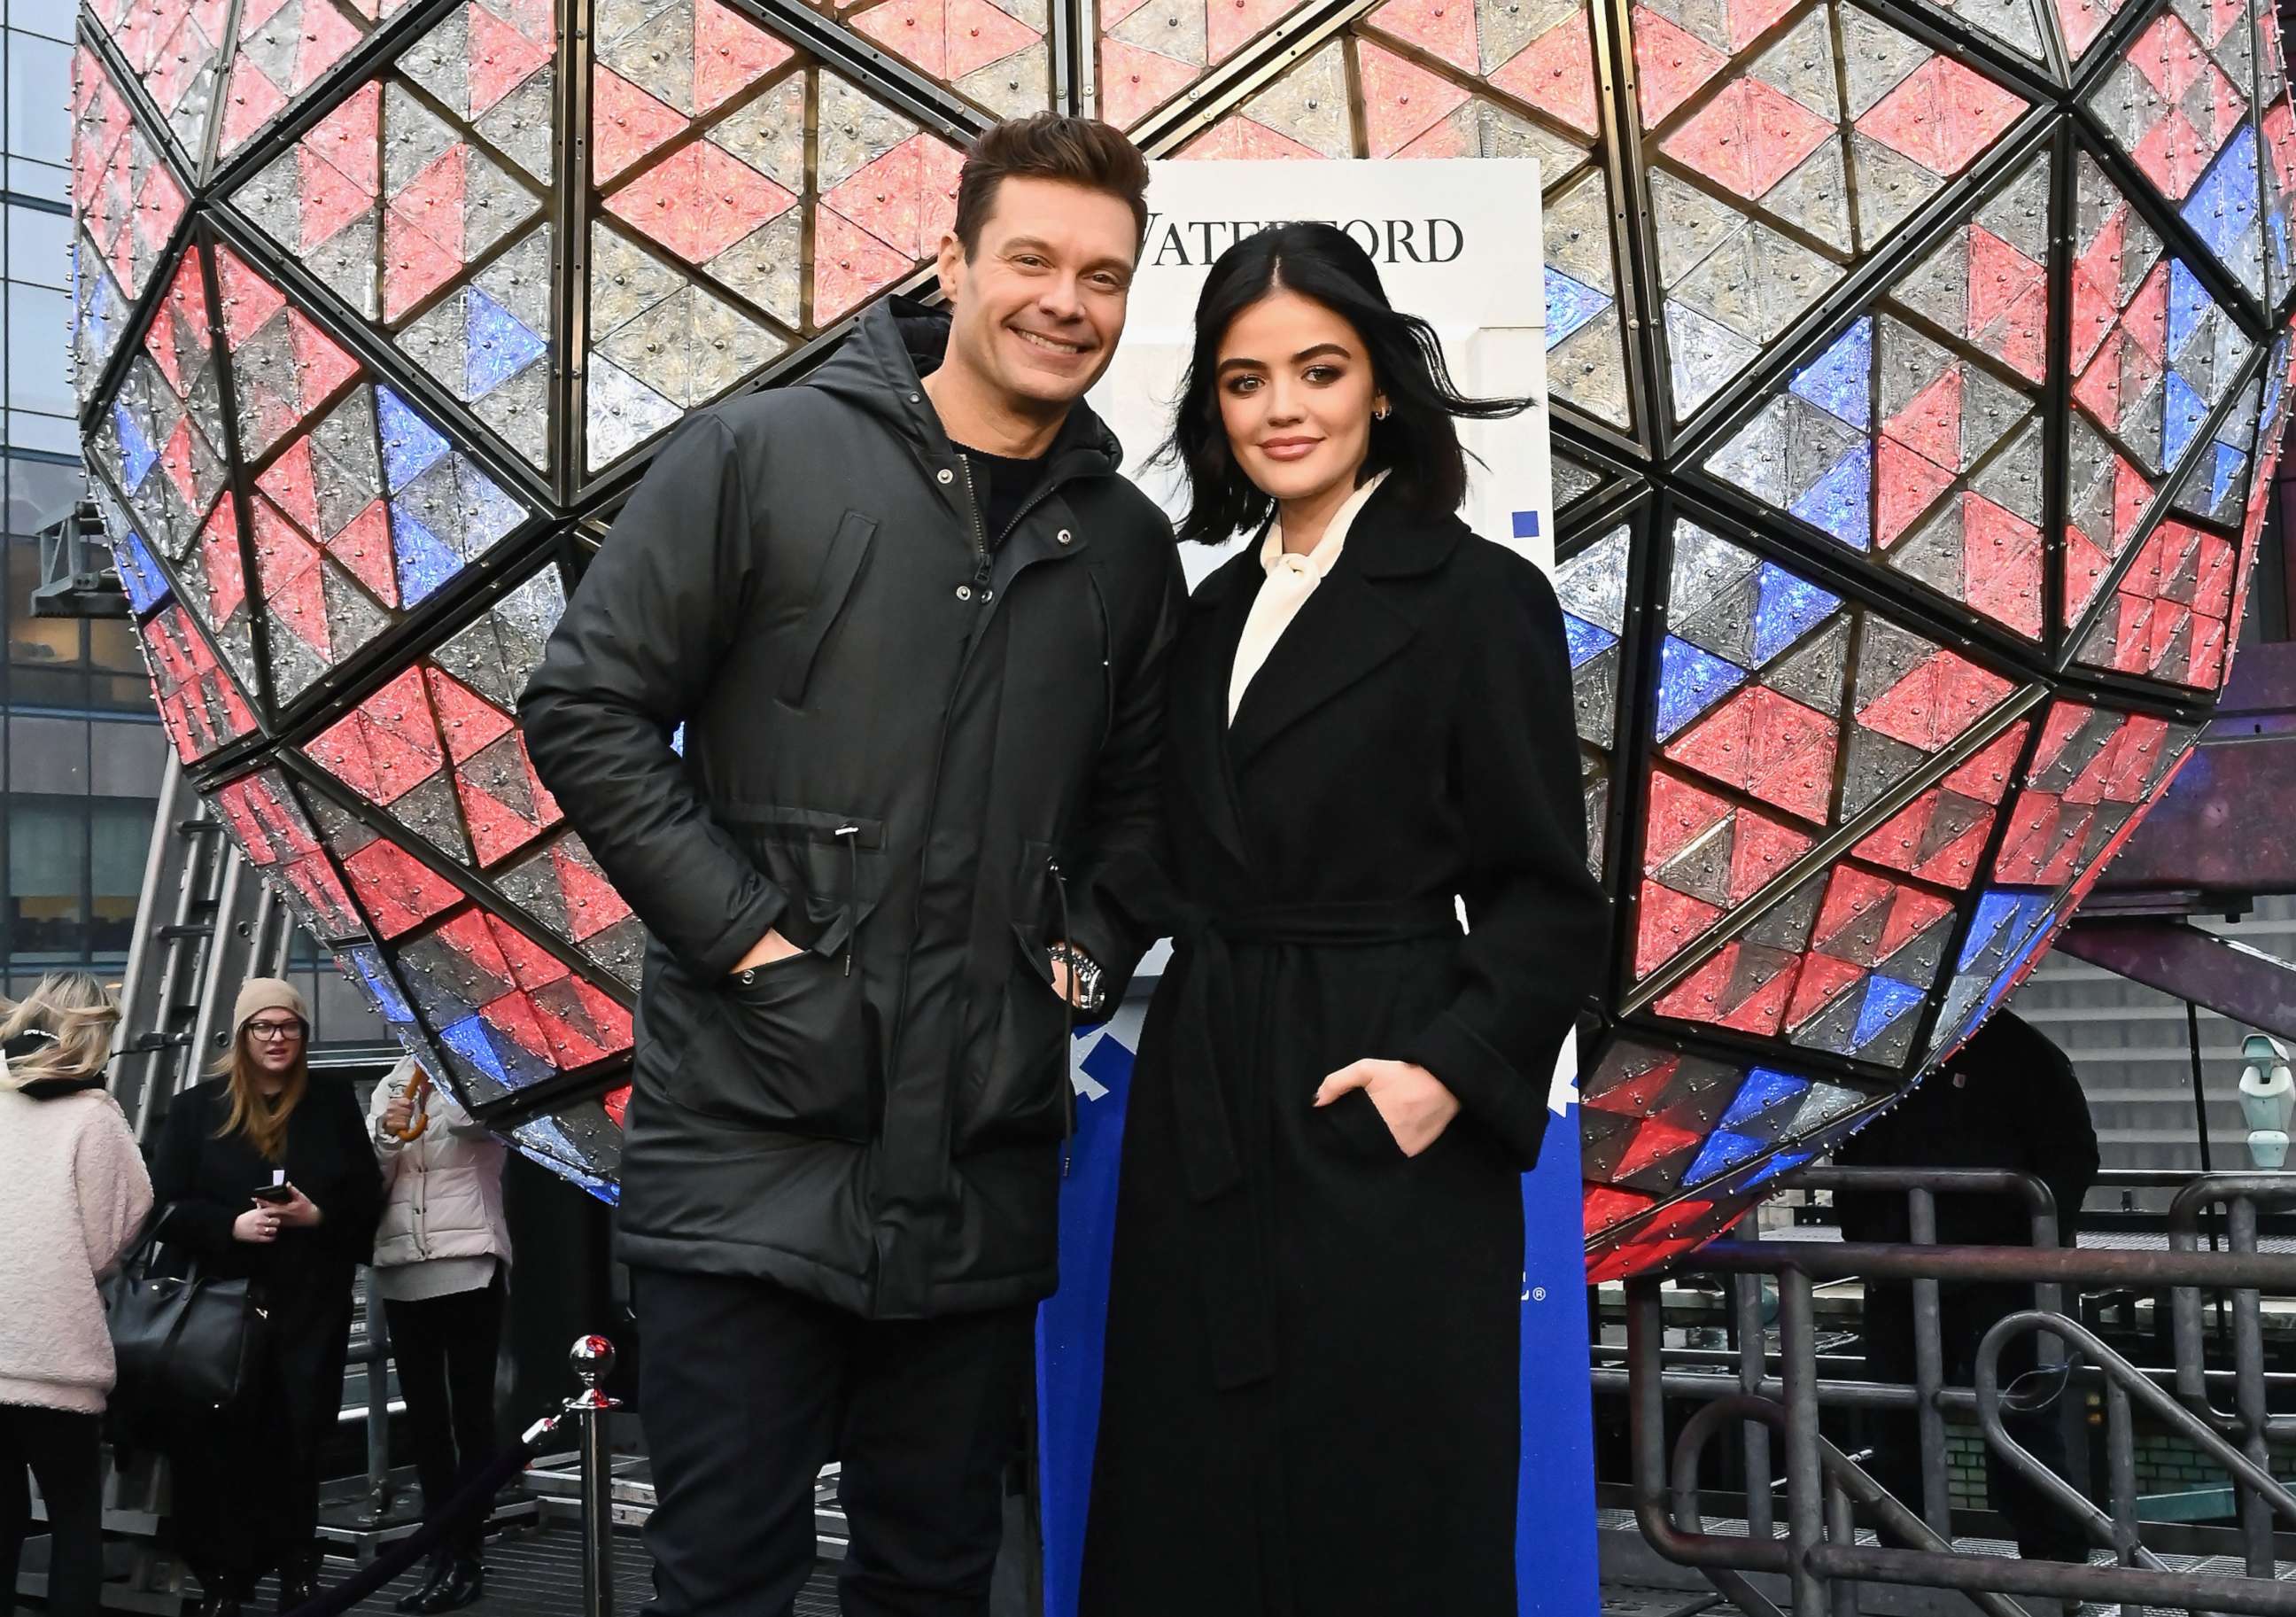 PHOTO: Ryan Seacrest and Lucy Hale attend a press junket for "Dick Clark's New Year's Rockin' Eve With Ryan Seacrest 2020," Dec. 30, 2019 in New York City.